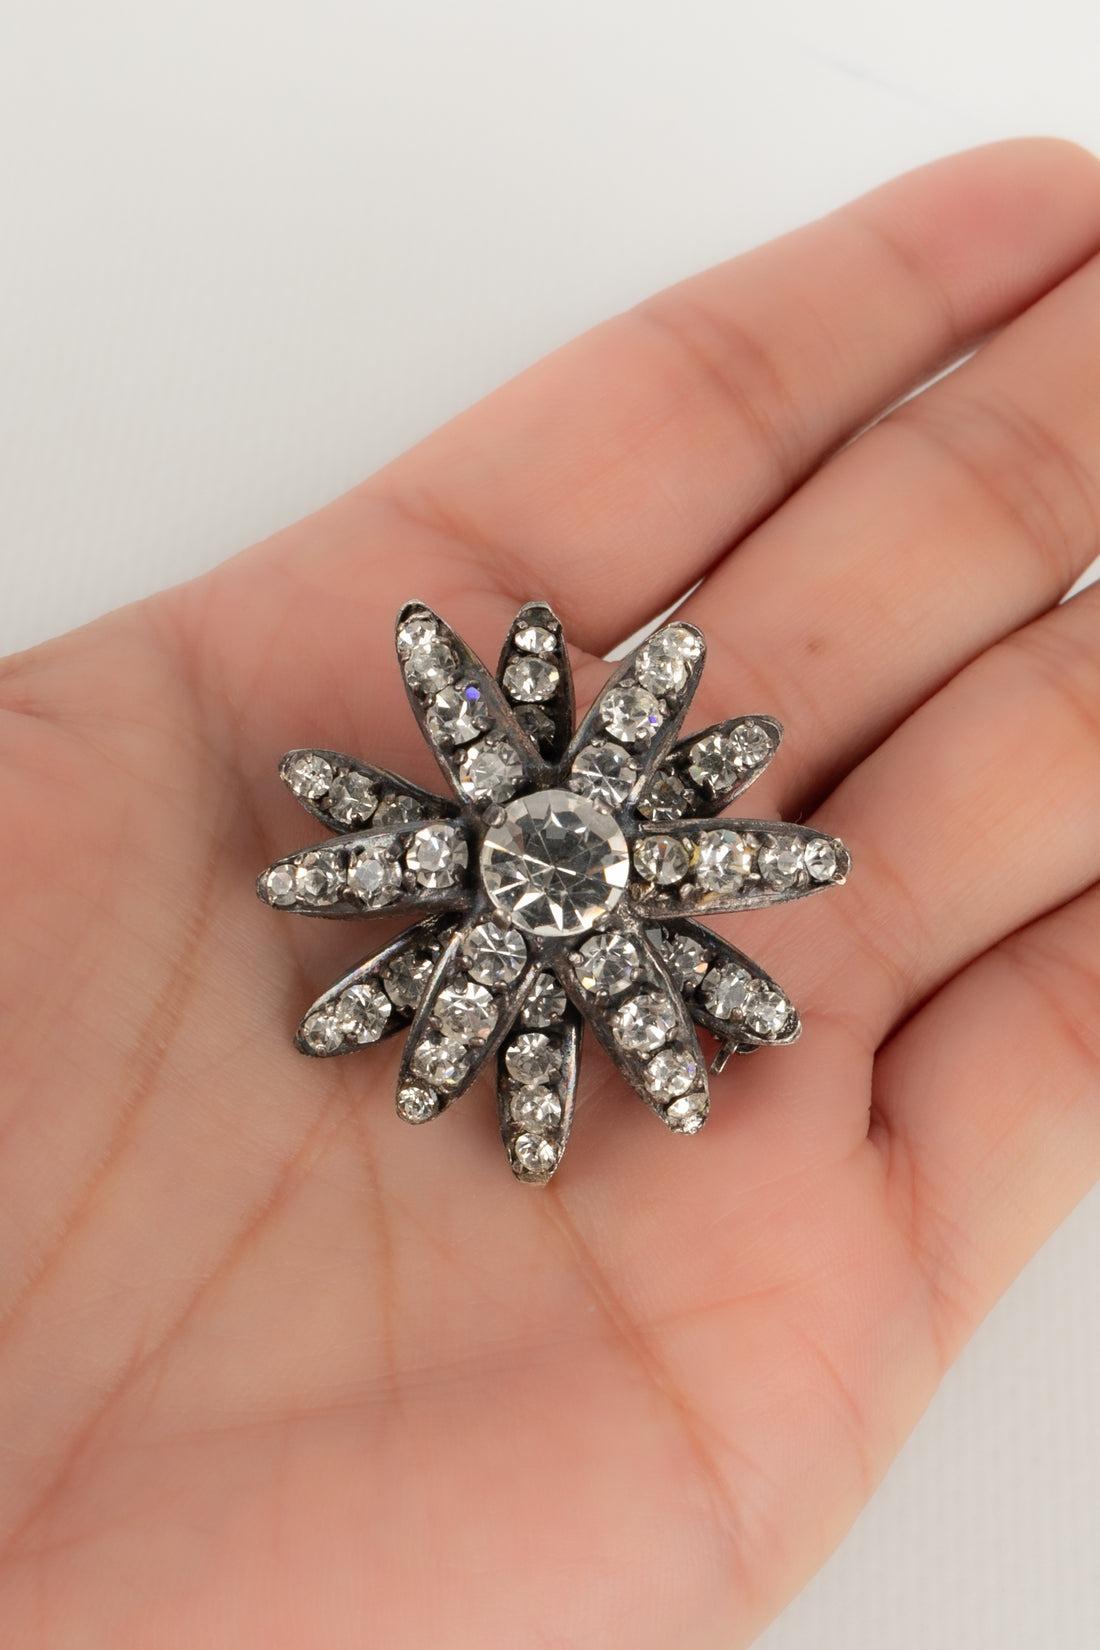 Chanel - (Made in France) Dark silvery metal brooch ornamented with Swarovski rhinestones.

Additional information:
Condition: Very good condition
Dimensions: Height: 3.5 cm

Seller Reference: BRB160